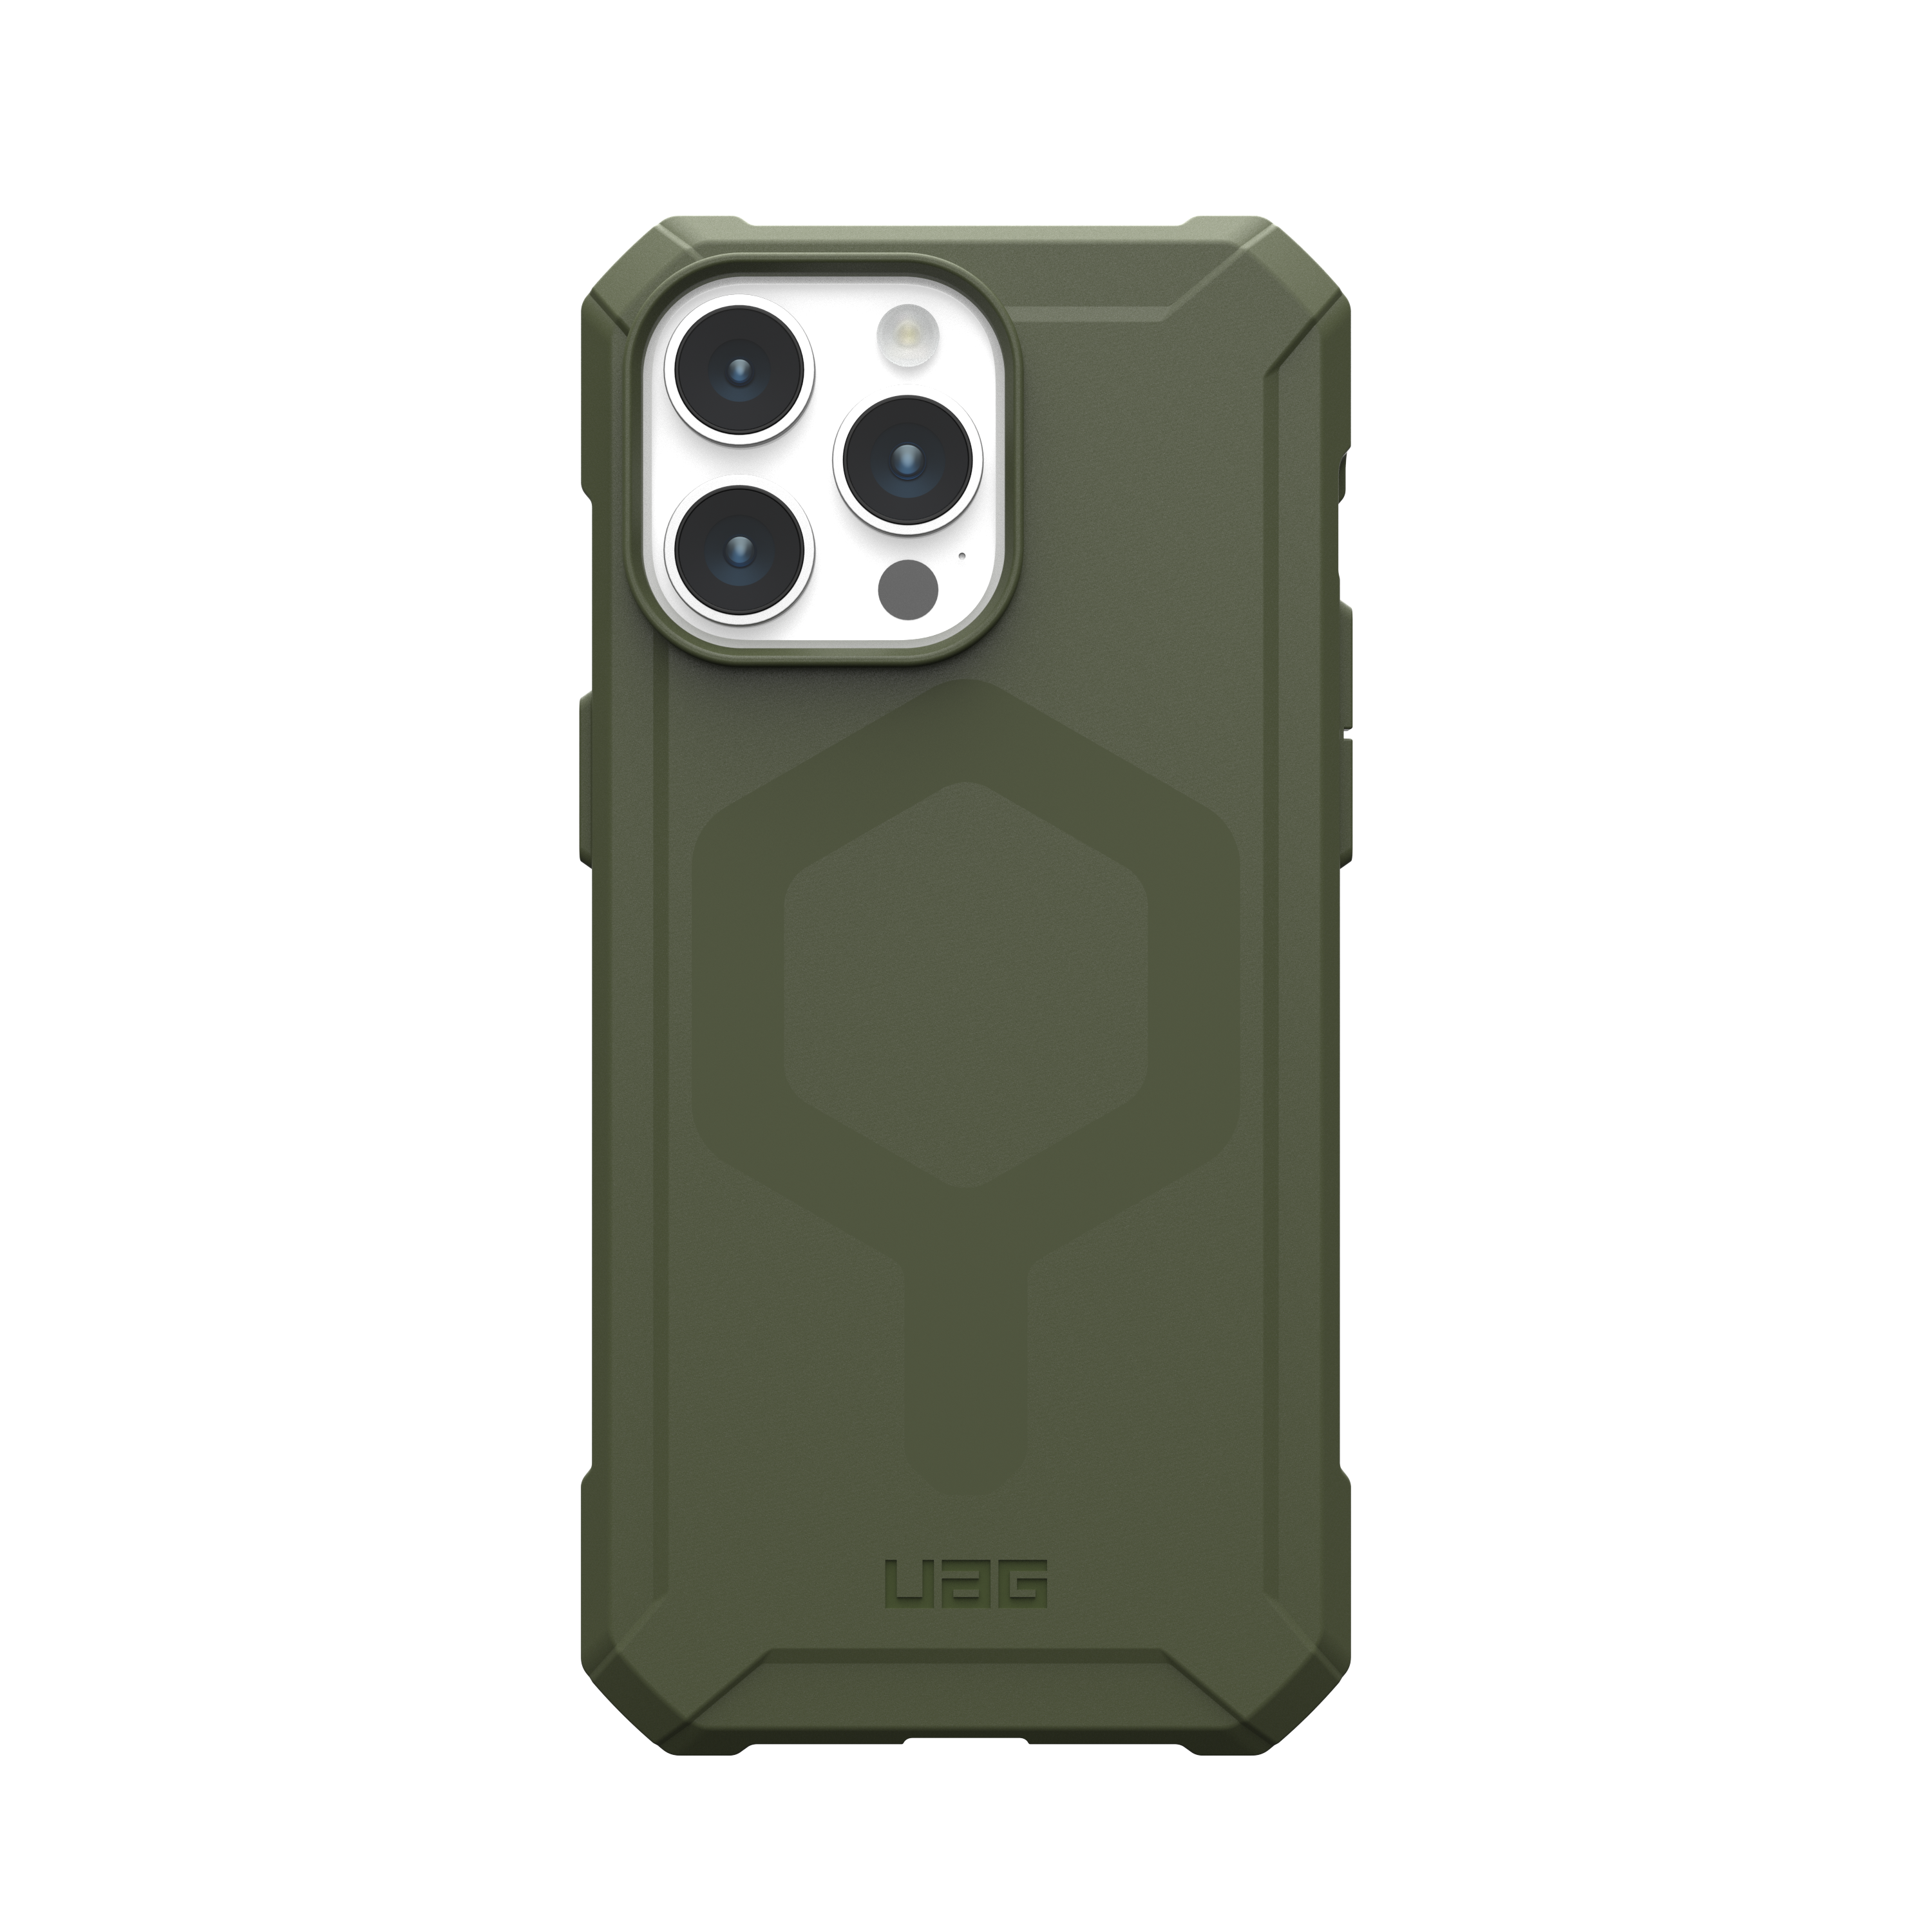 drab iPhone Backcover, Max, Essential MagSafe, ARMOR Pro olive 15 GEAR Apple, URBAN